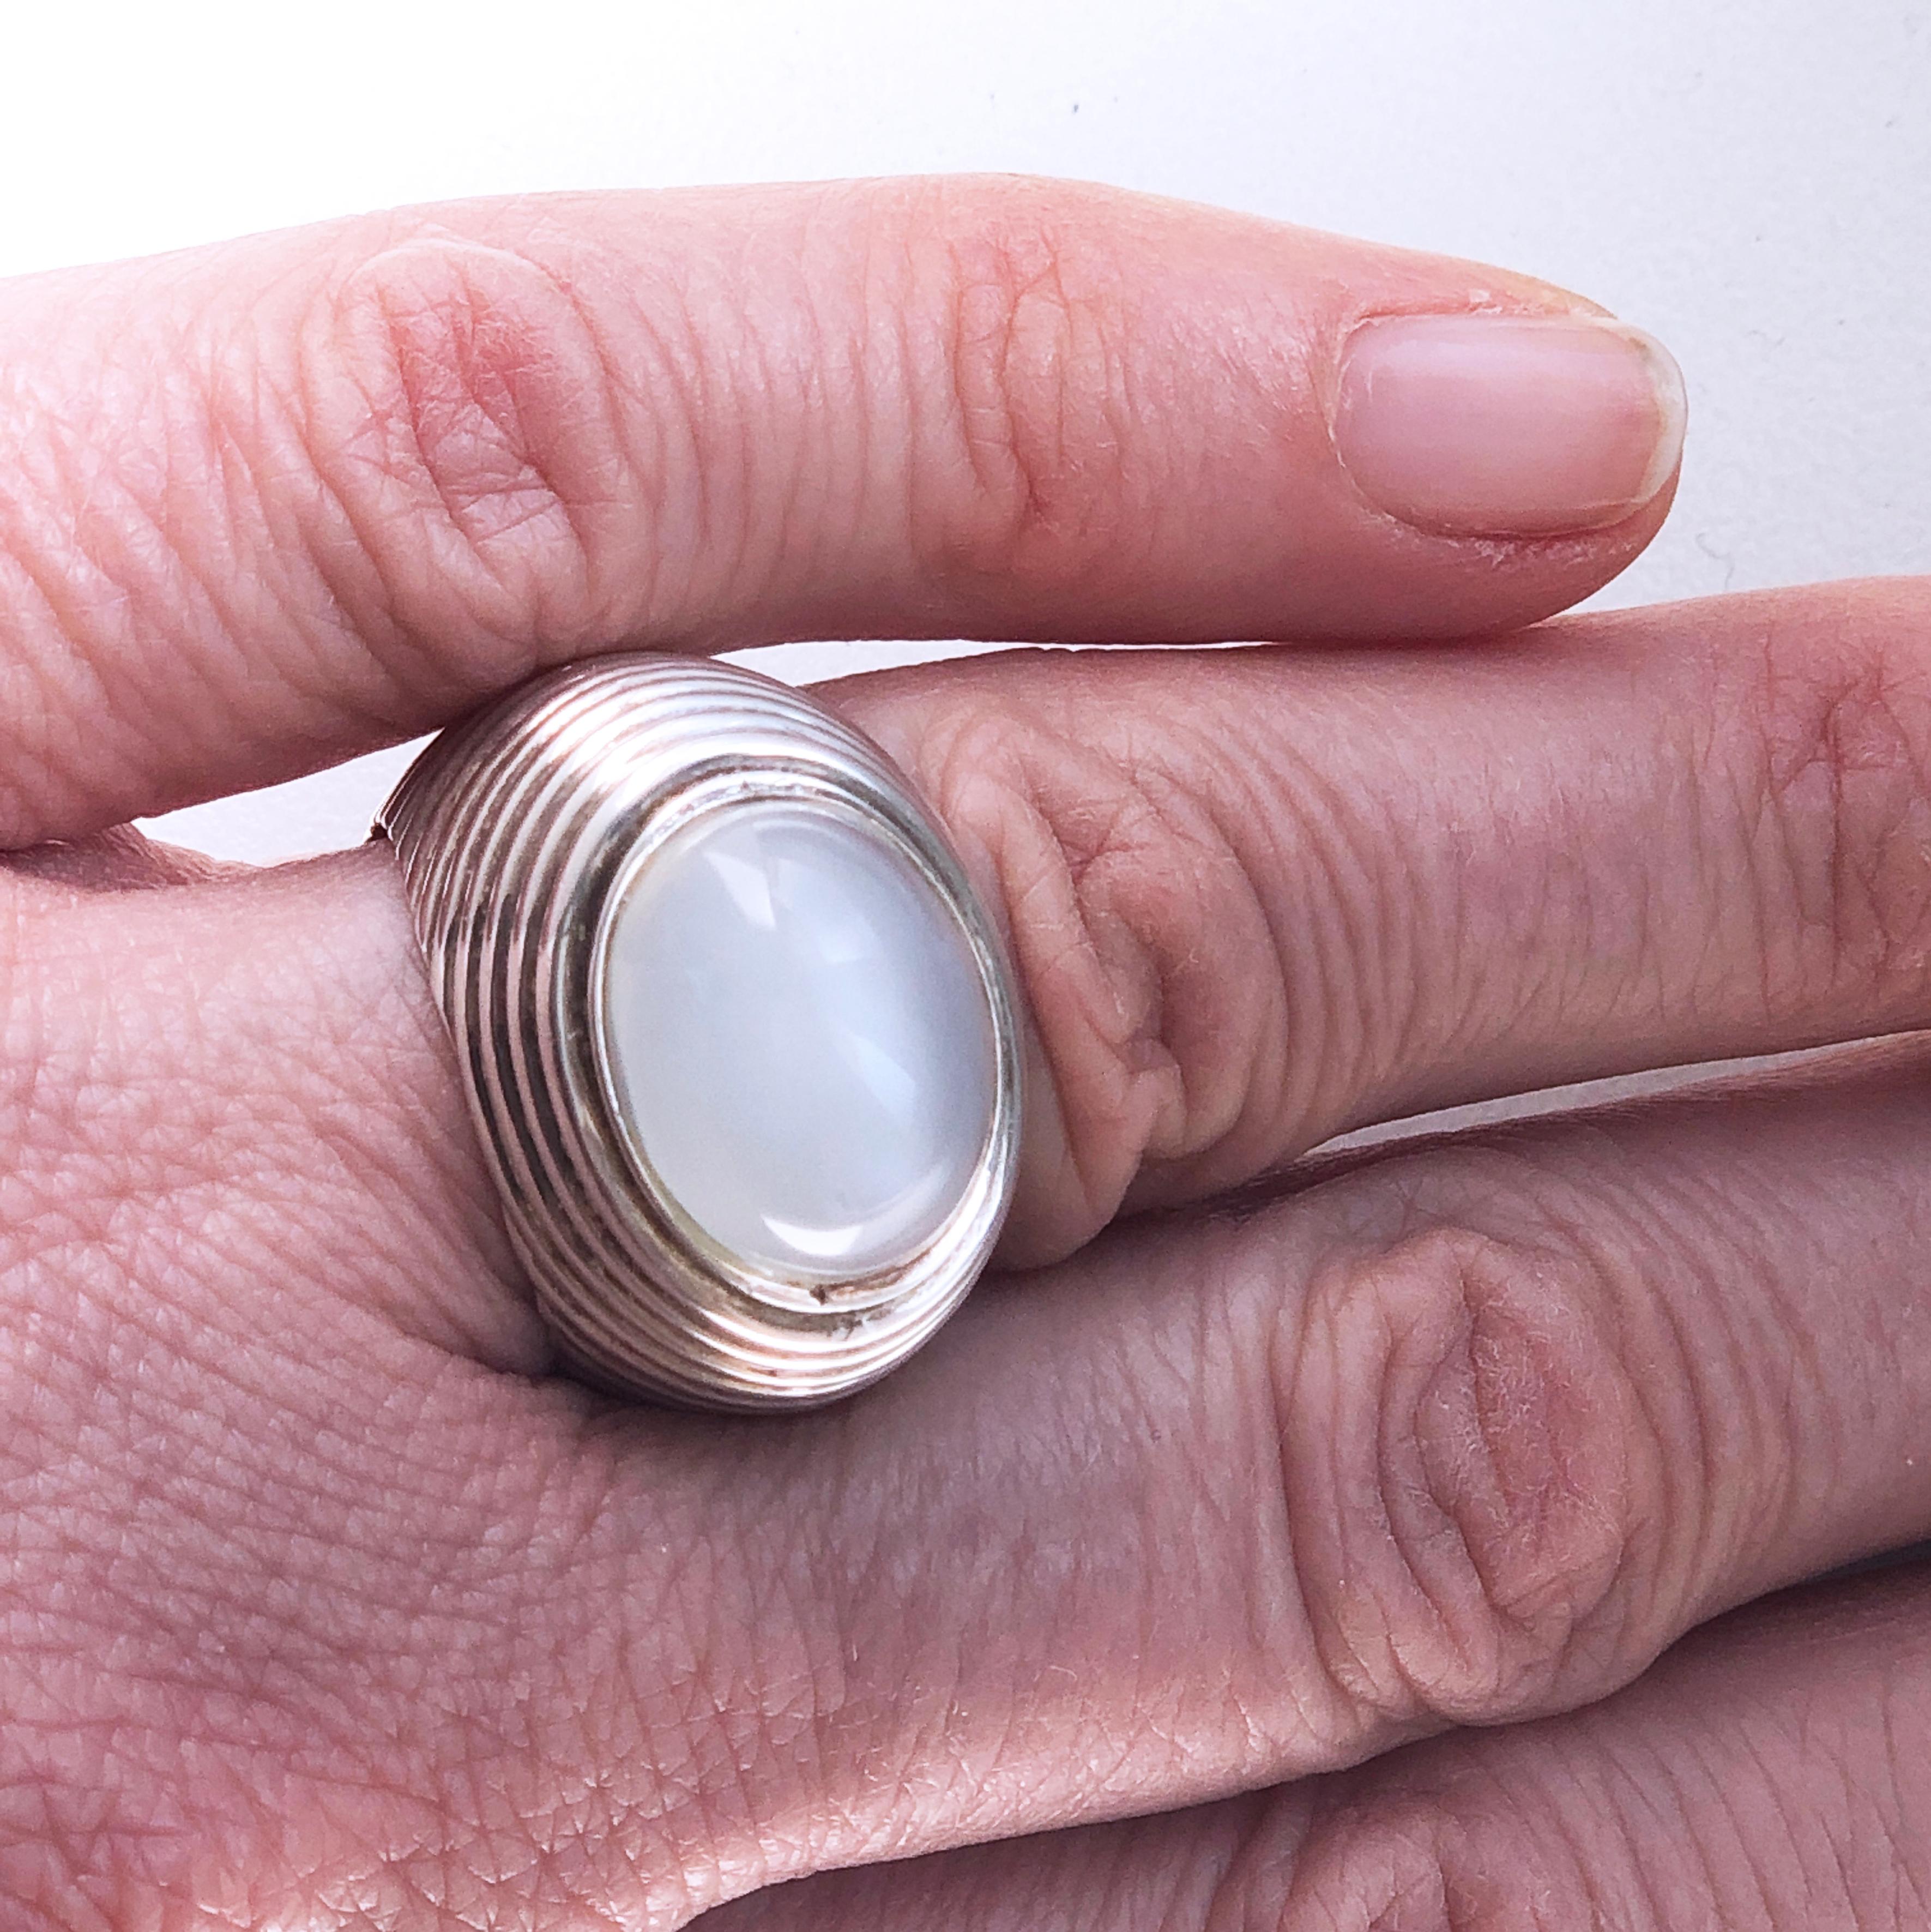 Berca One-of-a-Kind 12 Carat Natural Moonstone Cabochon Sterling Silver Ring 1